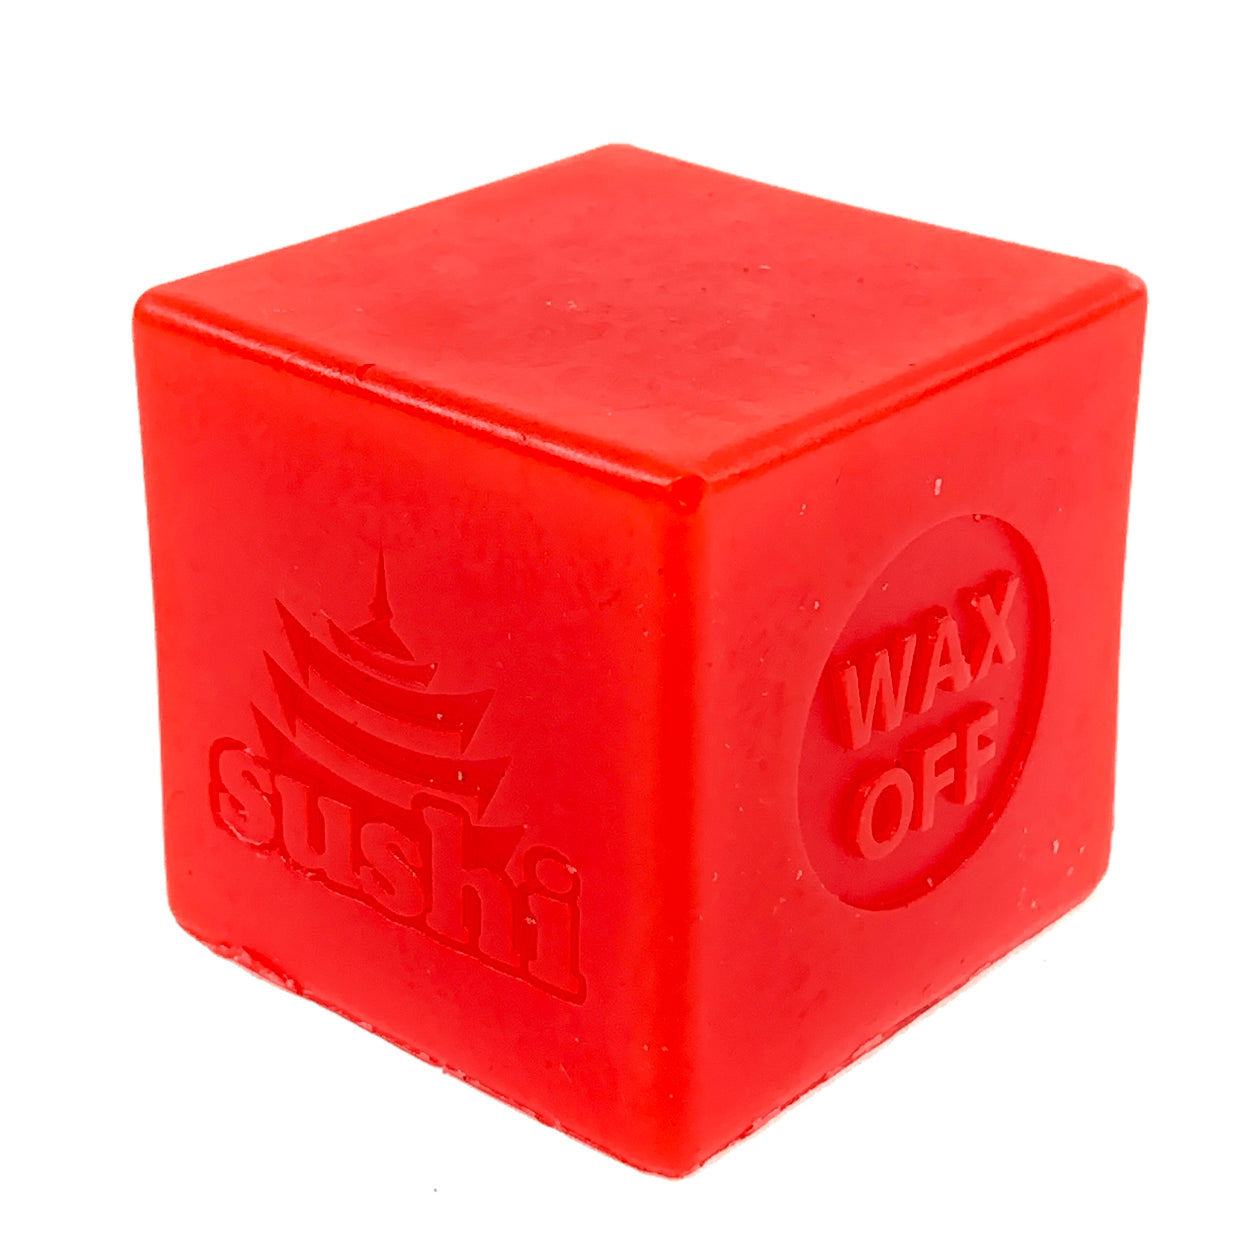 Sushi Wax On/Off Wax - Red - Prime Delux Store